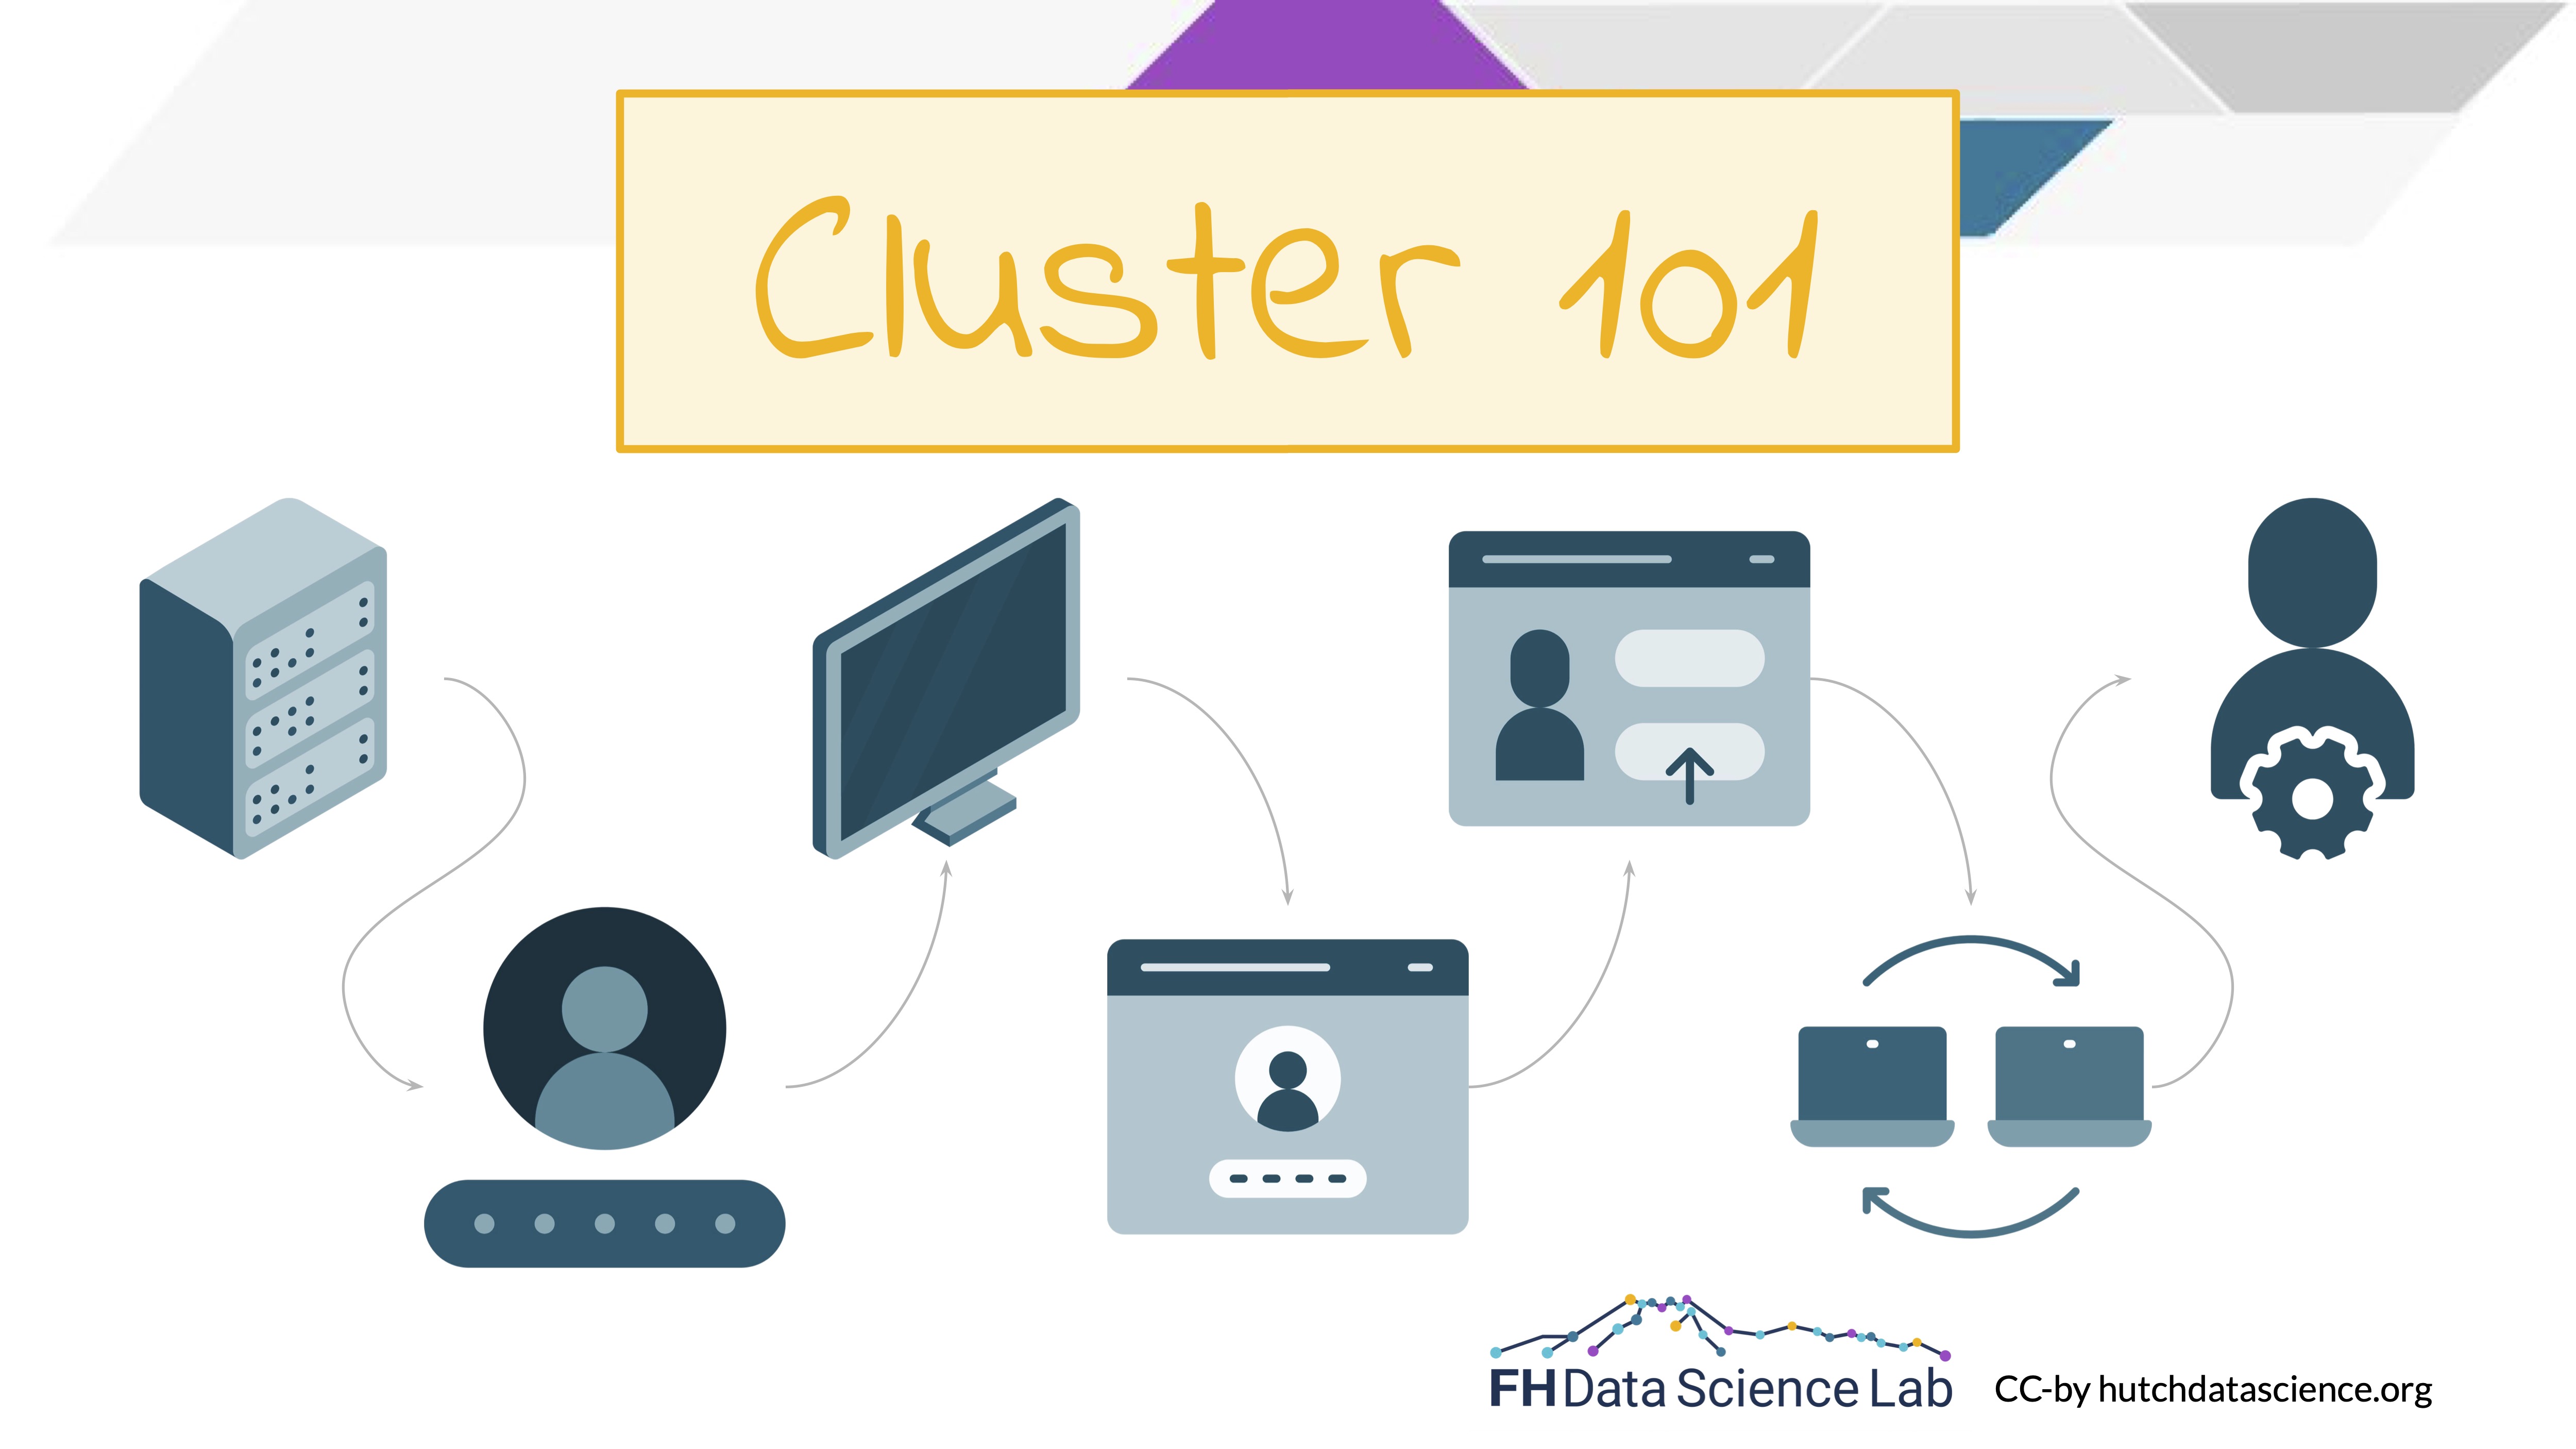 Fred Hutch Cluster 101 journey